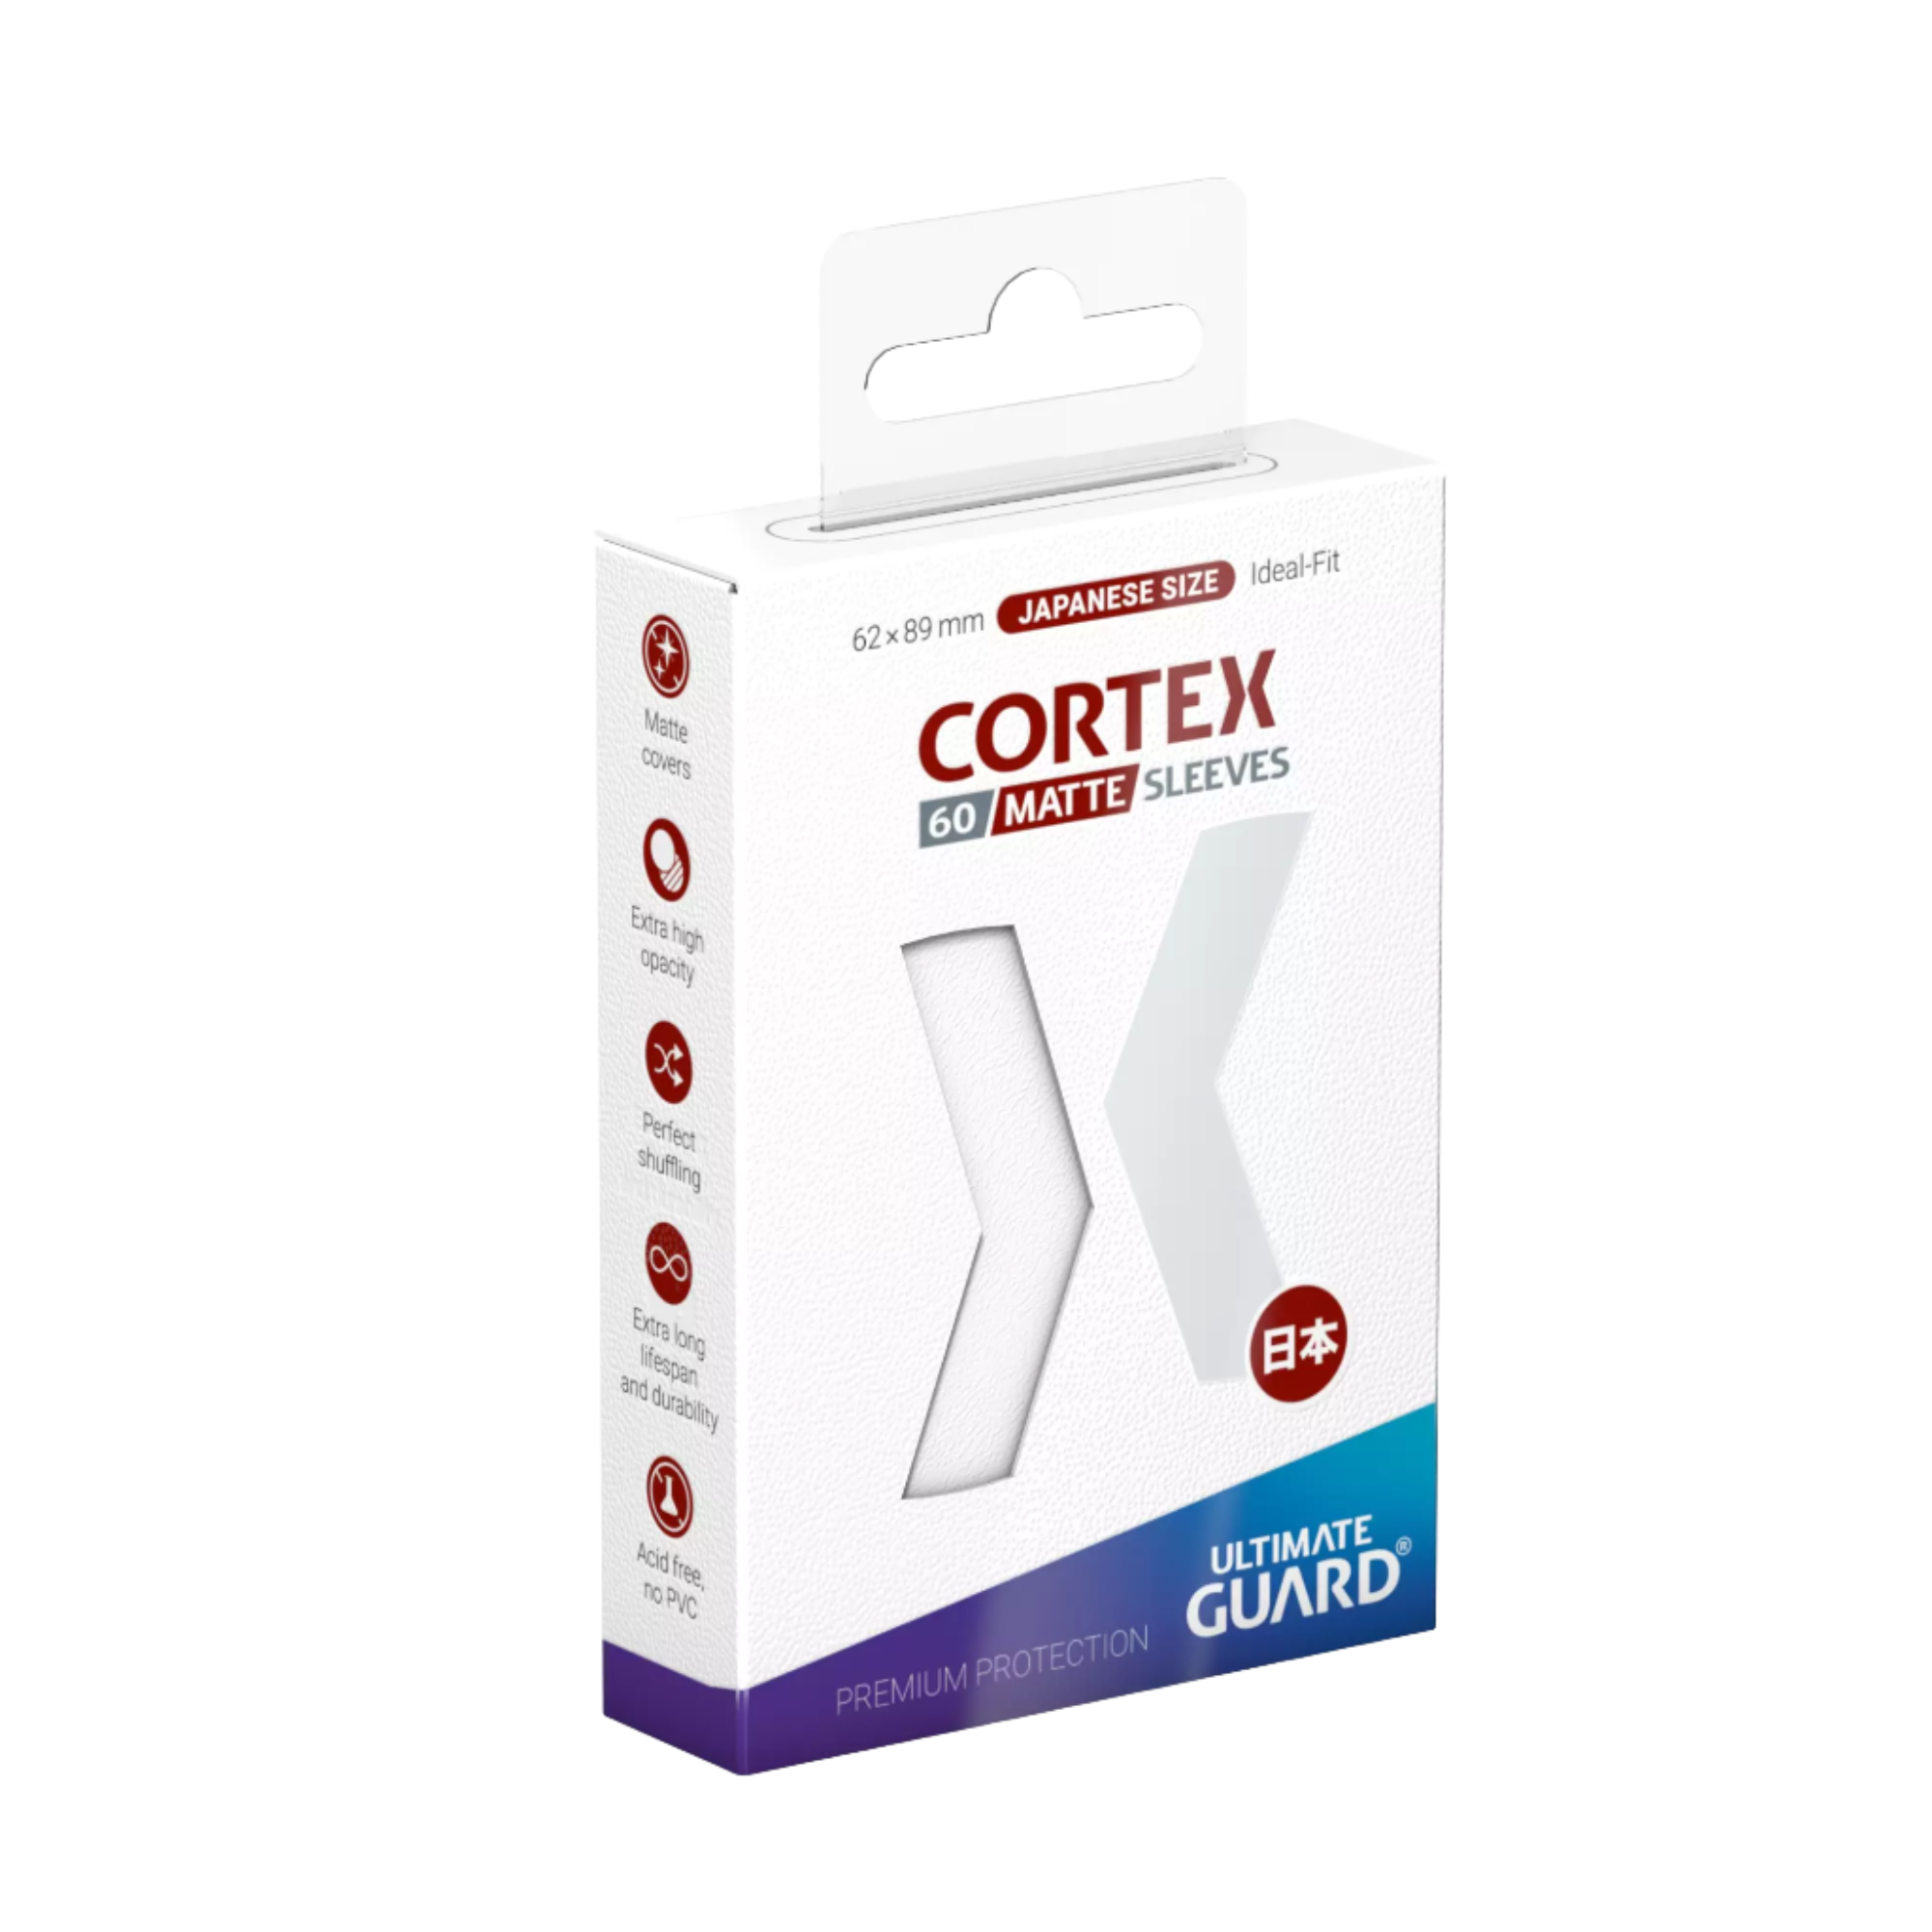 Ultimate Guard - Cortex Sleeves - Japanese Size - Ideal-Fit - Matte White - 60pk